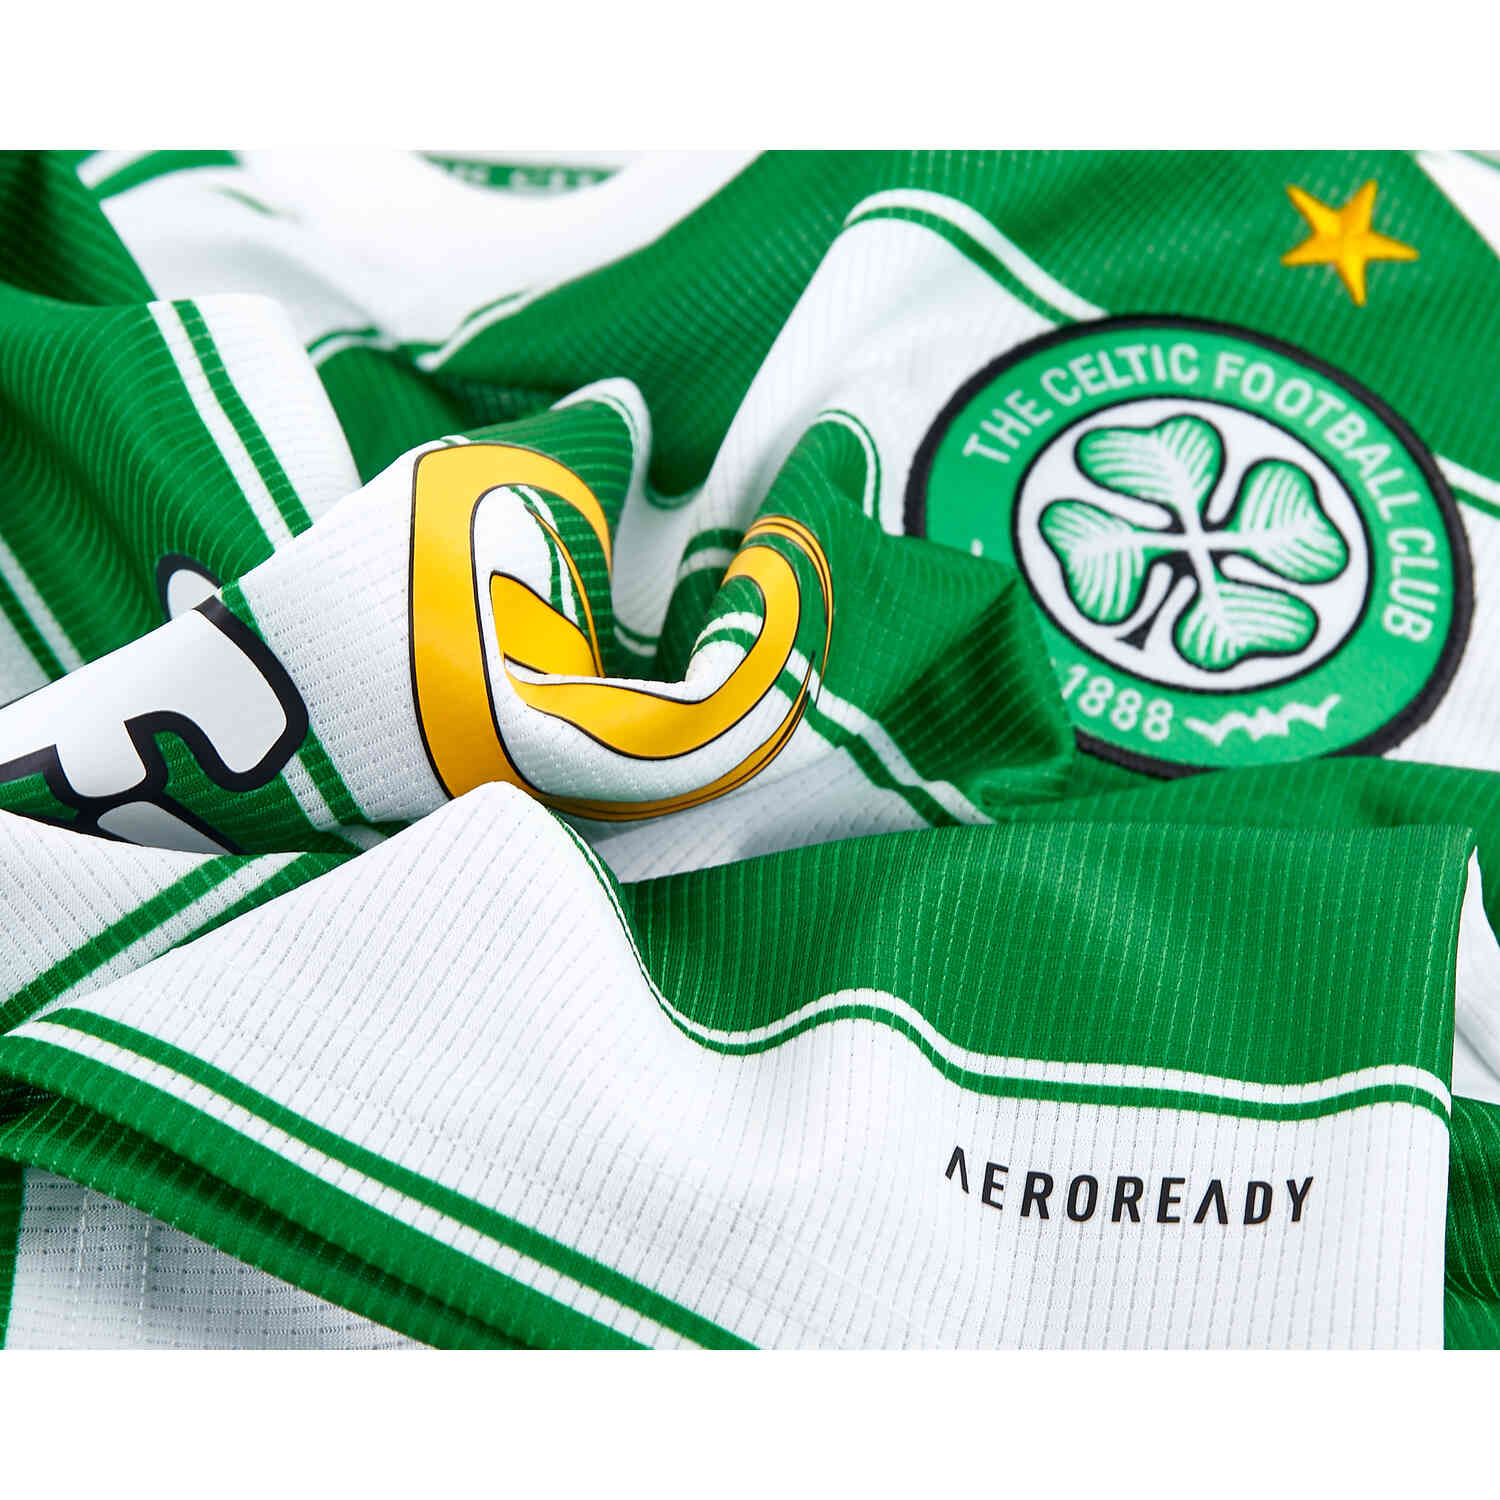 Adidas Celtic Home Jersey 2020-2021 - S